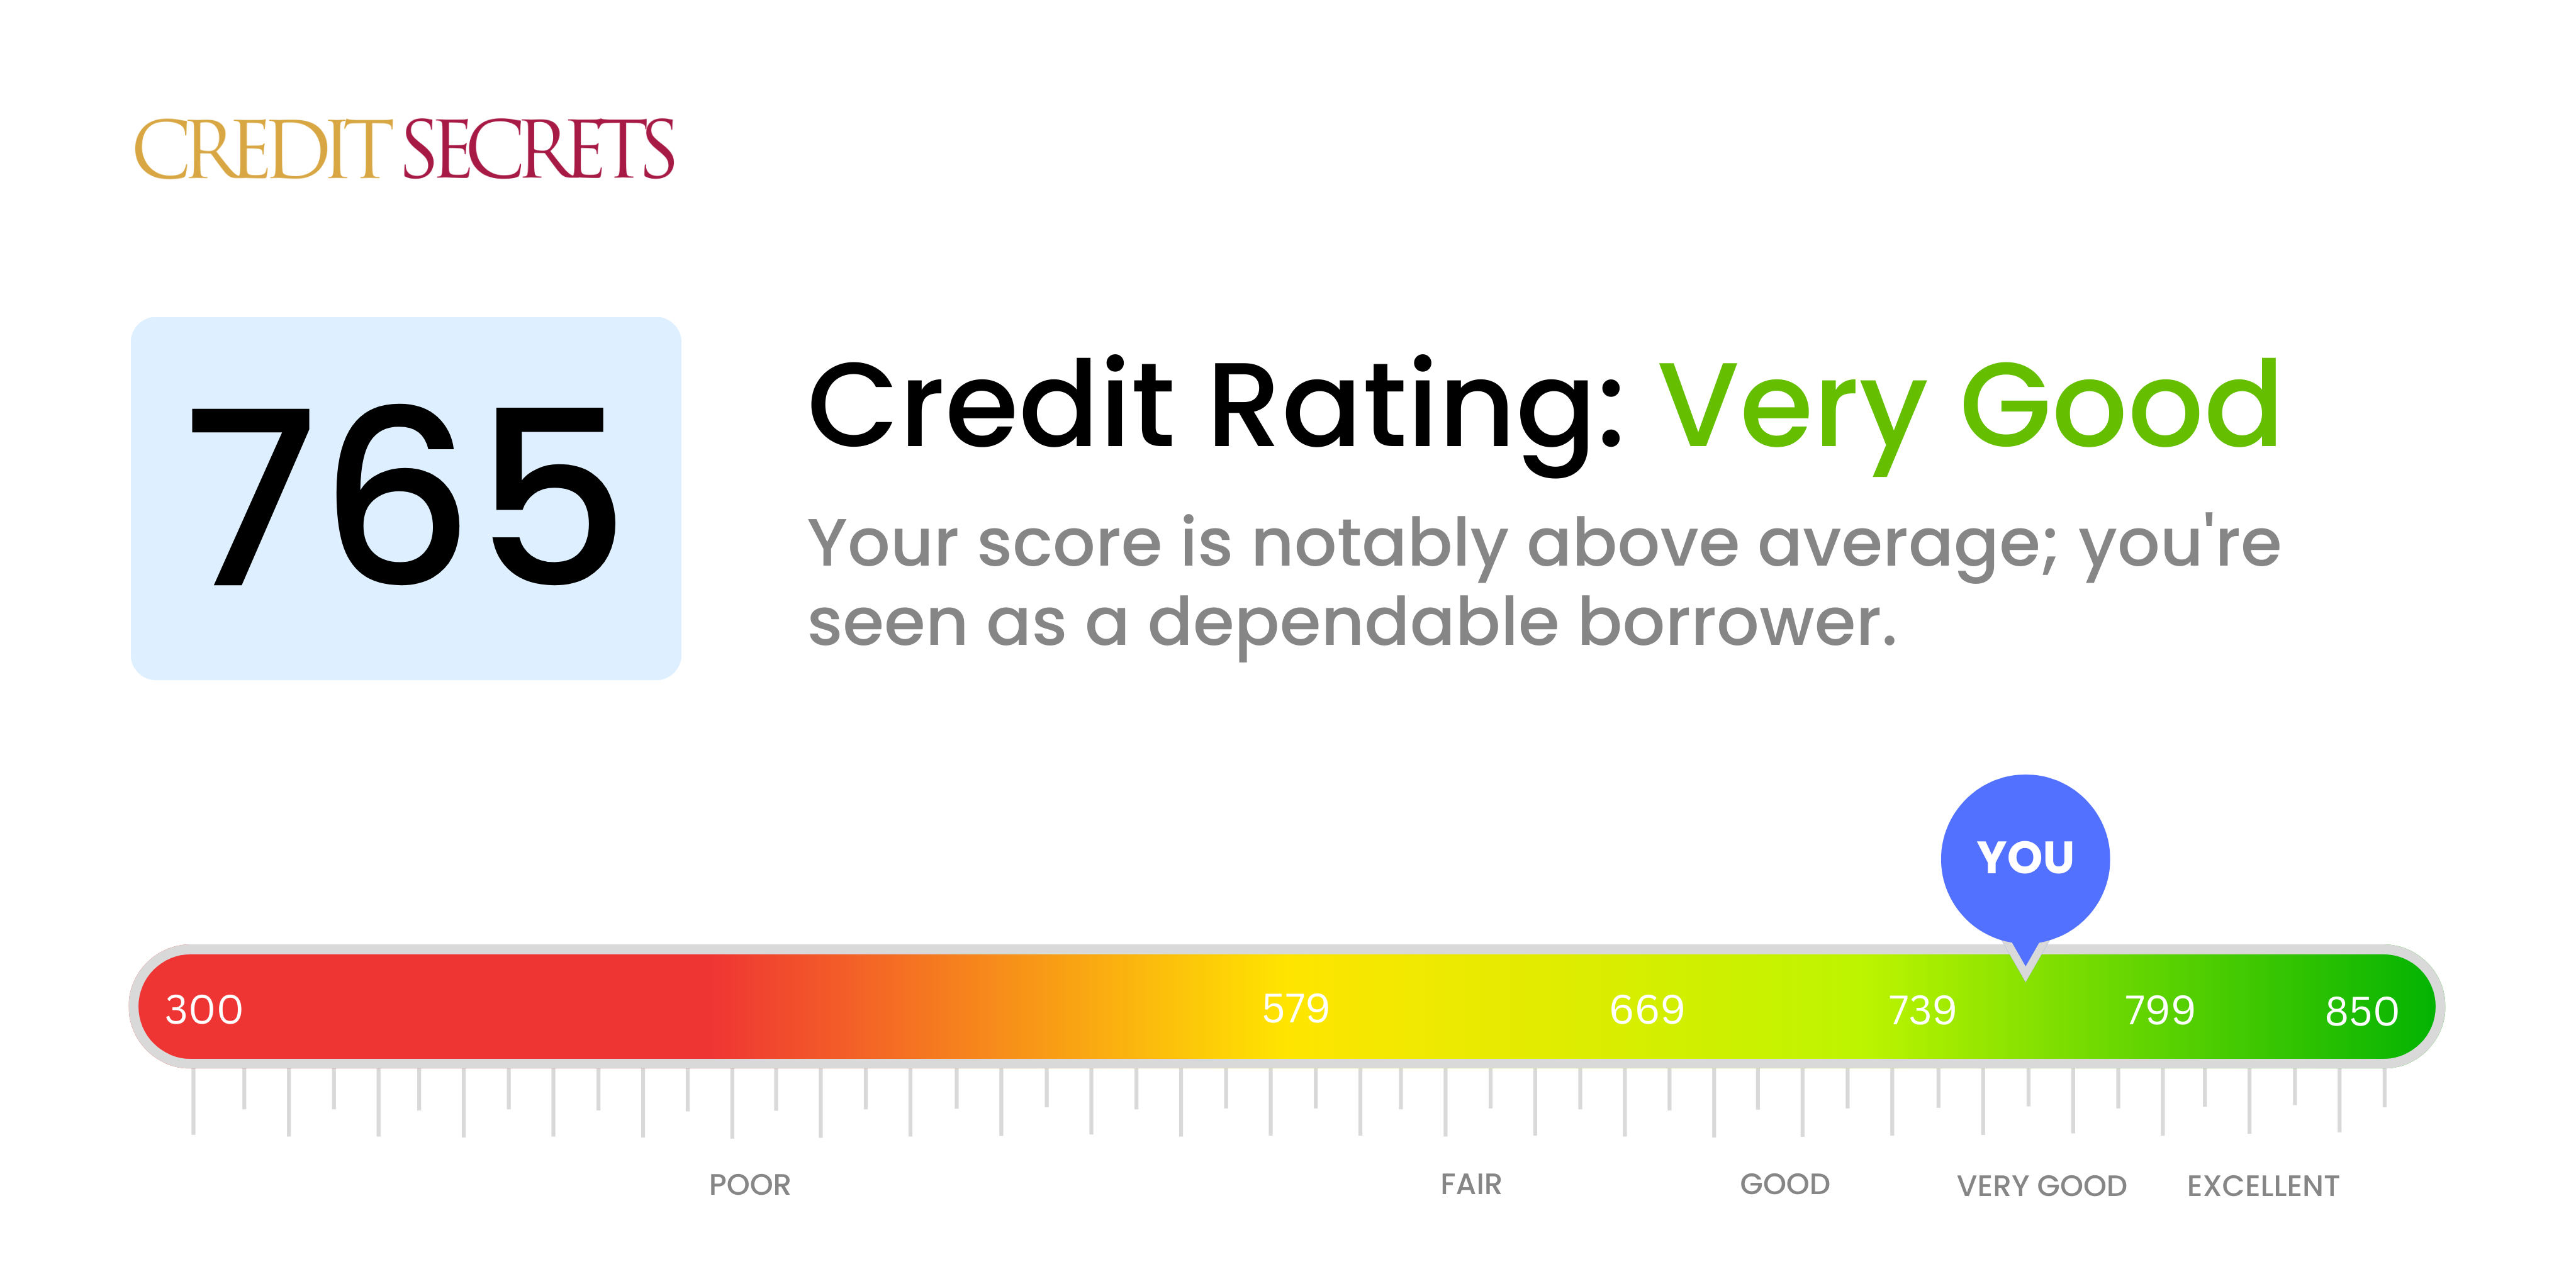 Is 765 a good credit score?